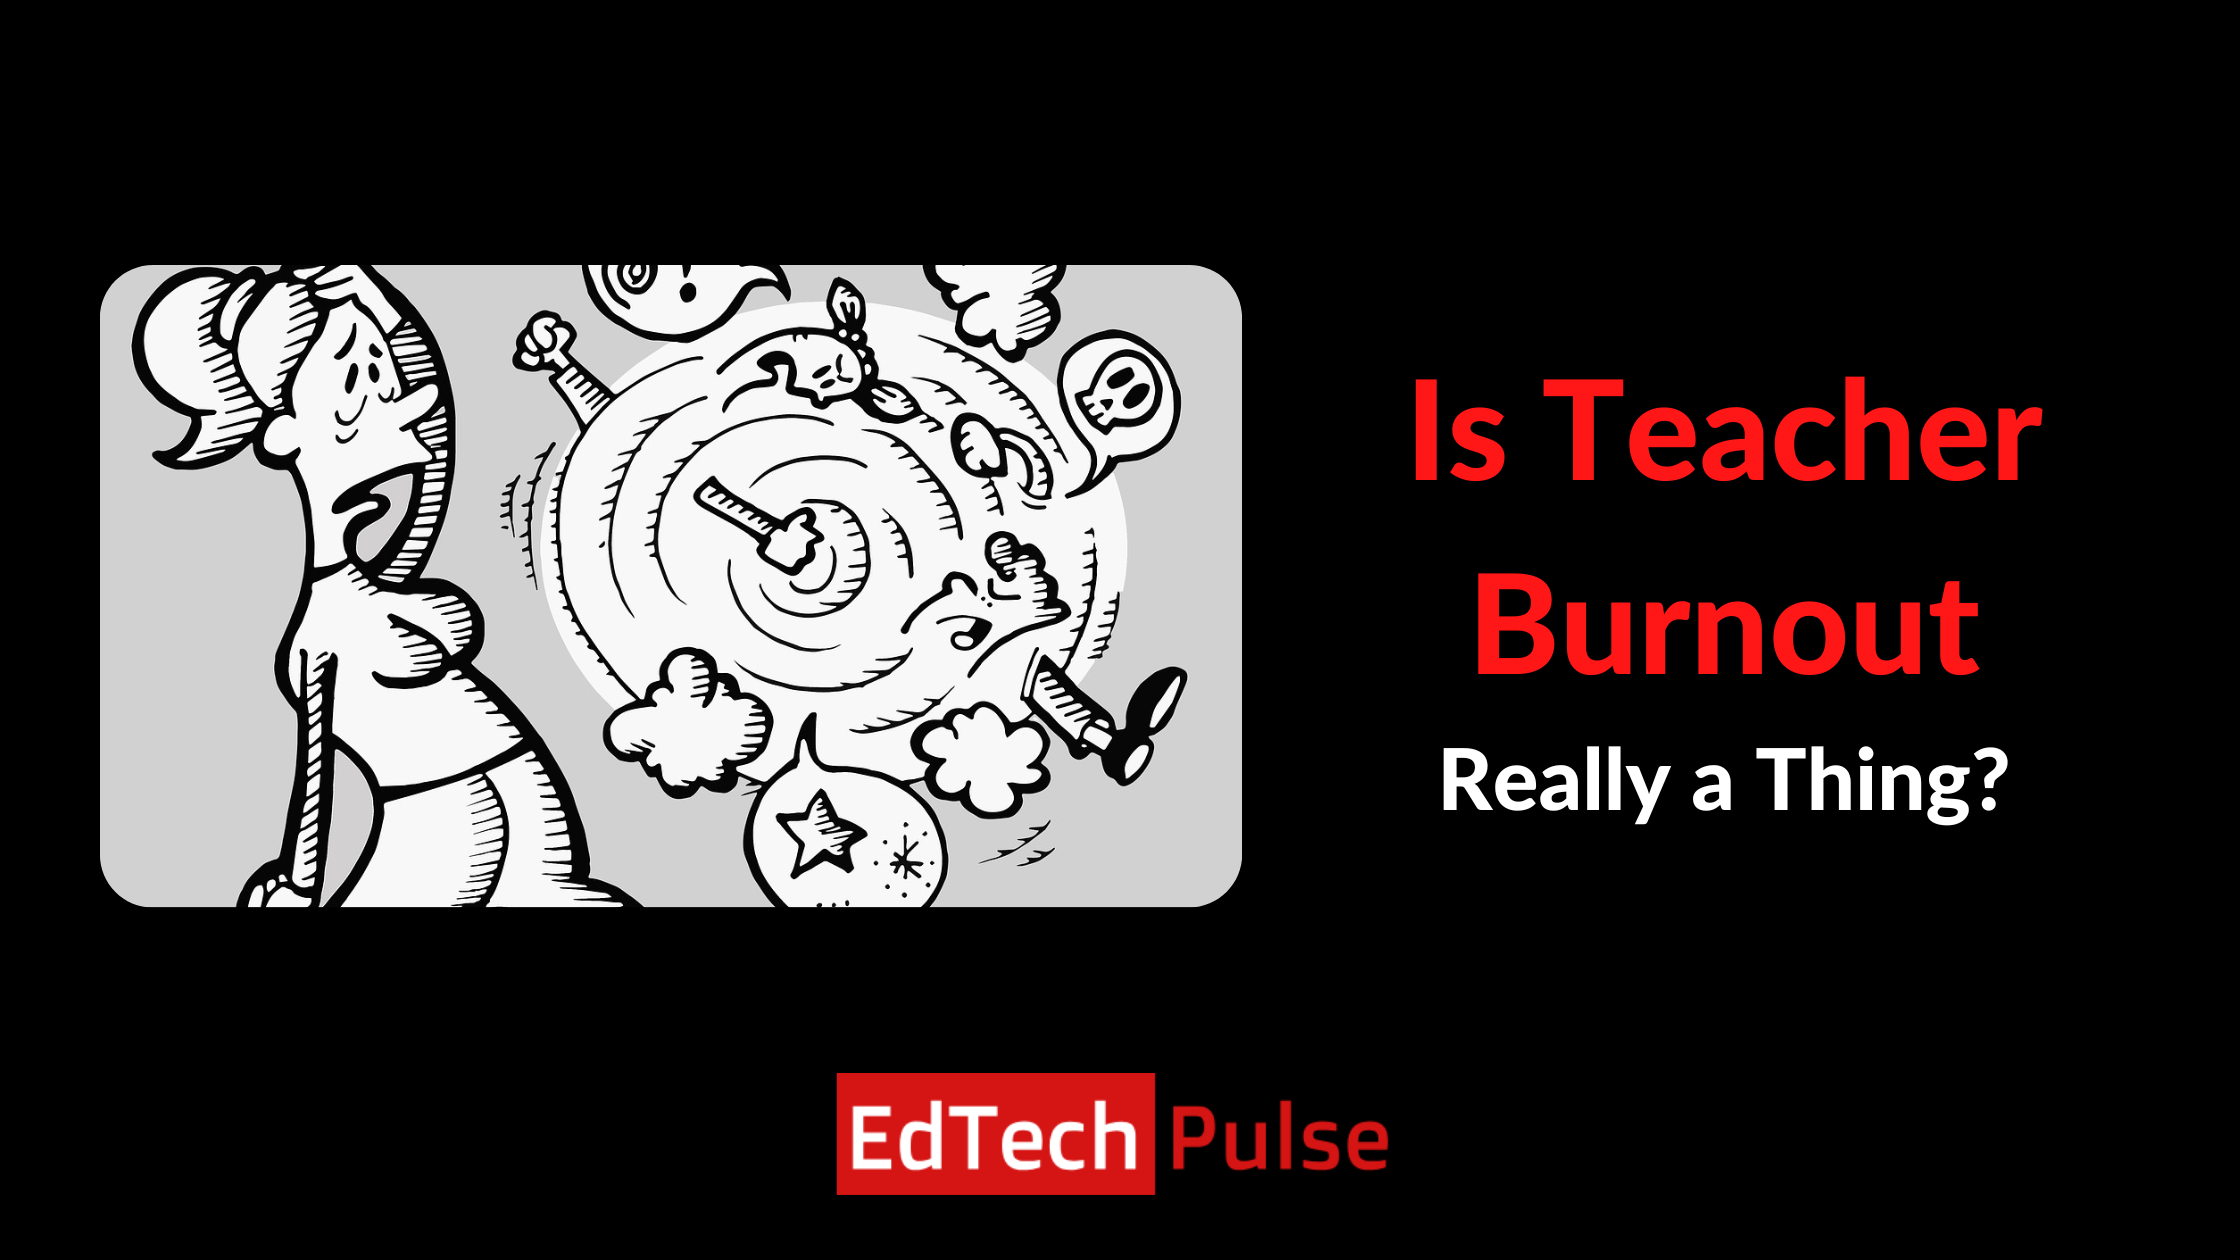 Is Teacher Burnout Really a Thing?